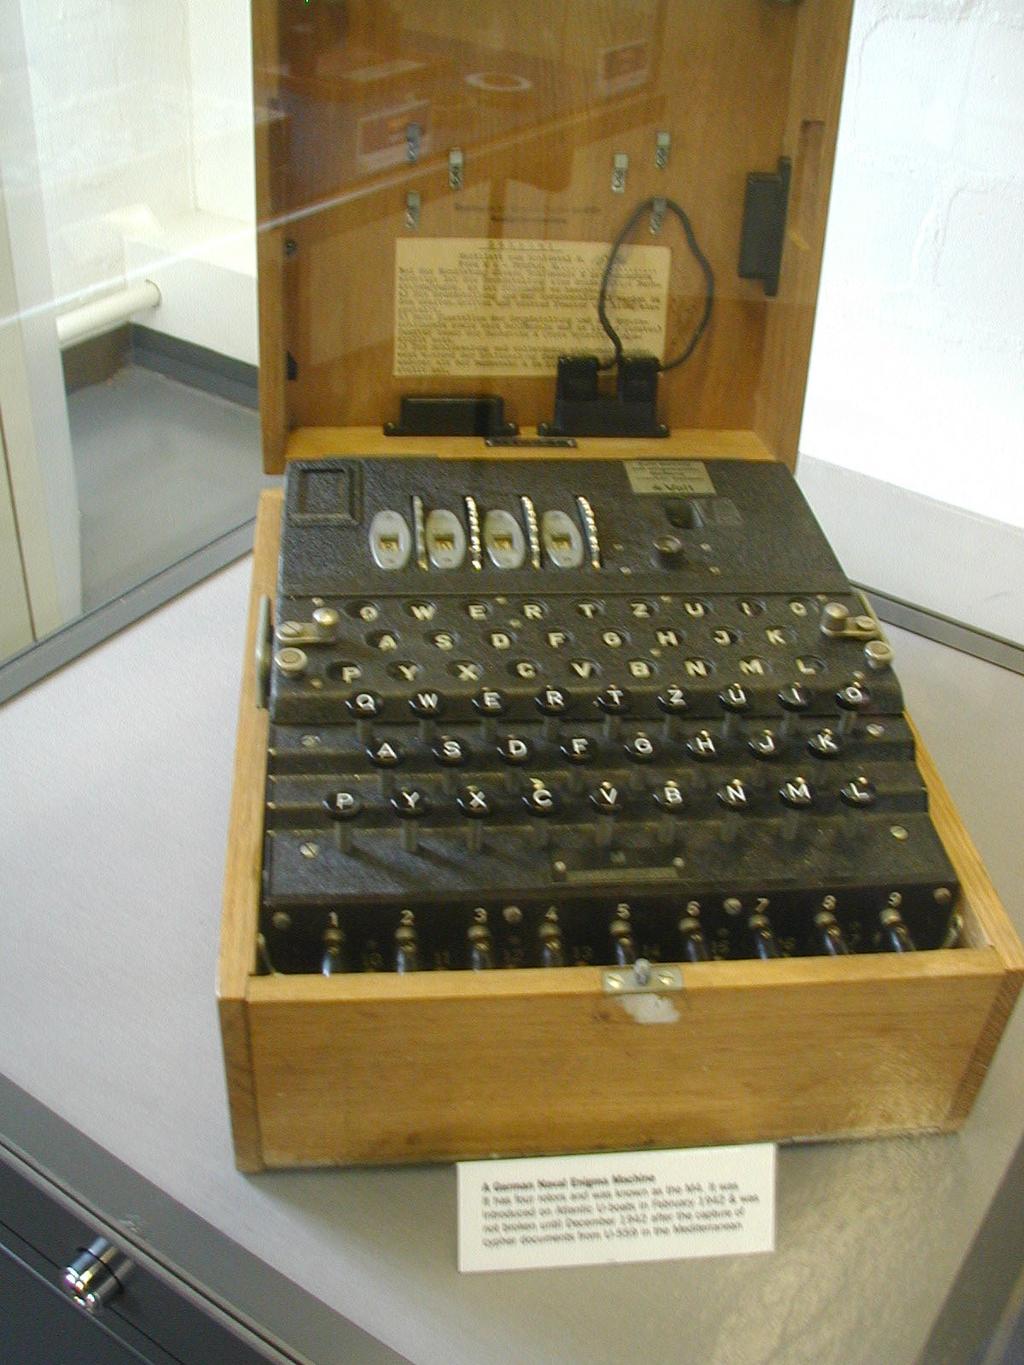 keyboard for input and lighted letters for the output. Some of the later devices used punched card and paper tape for input and/or output.